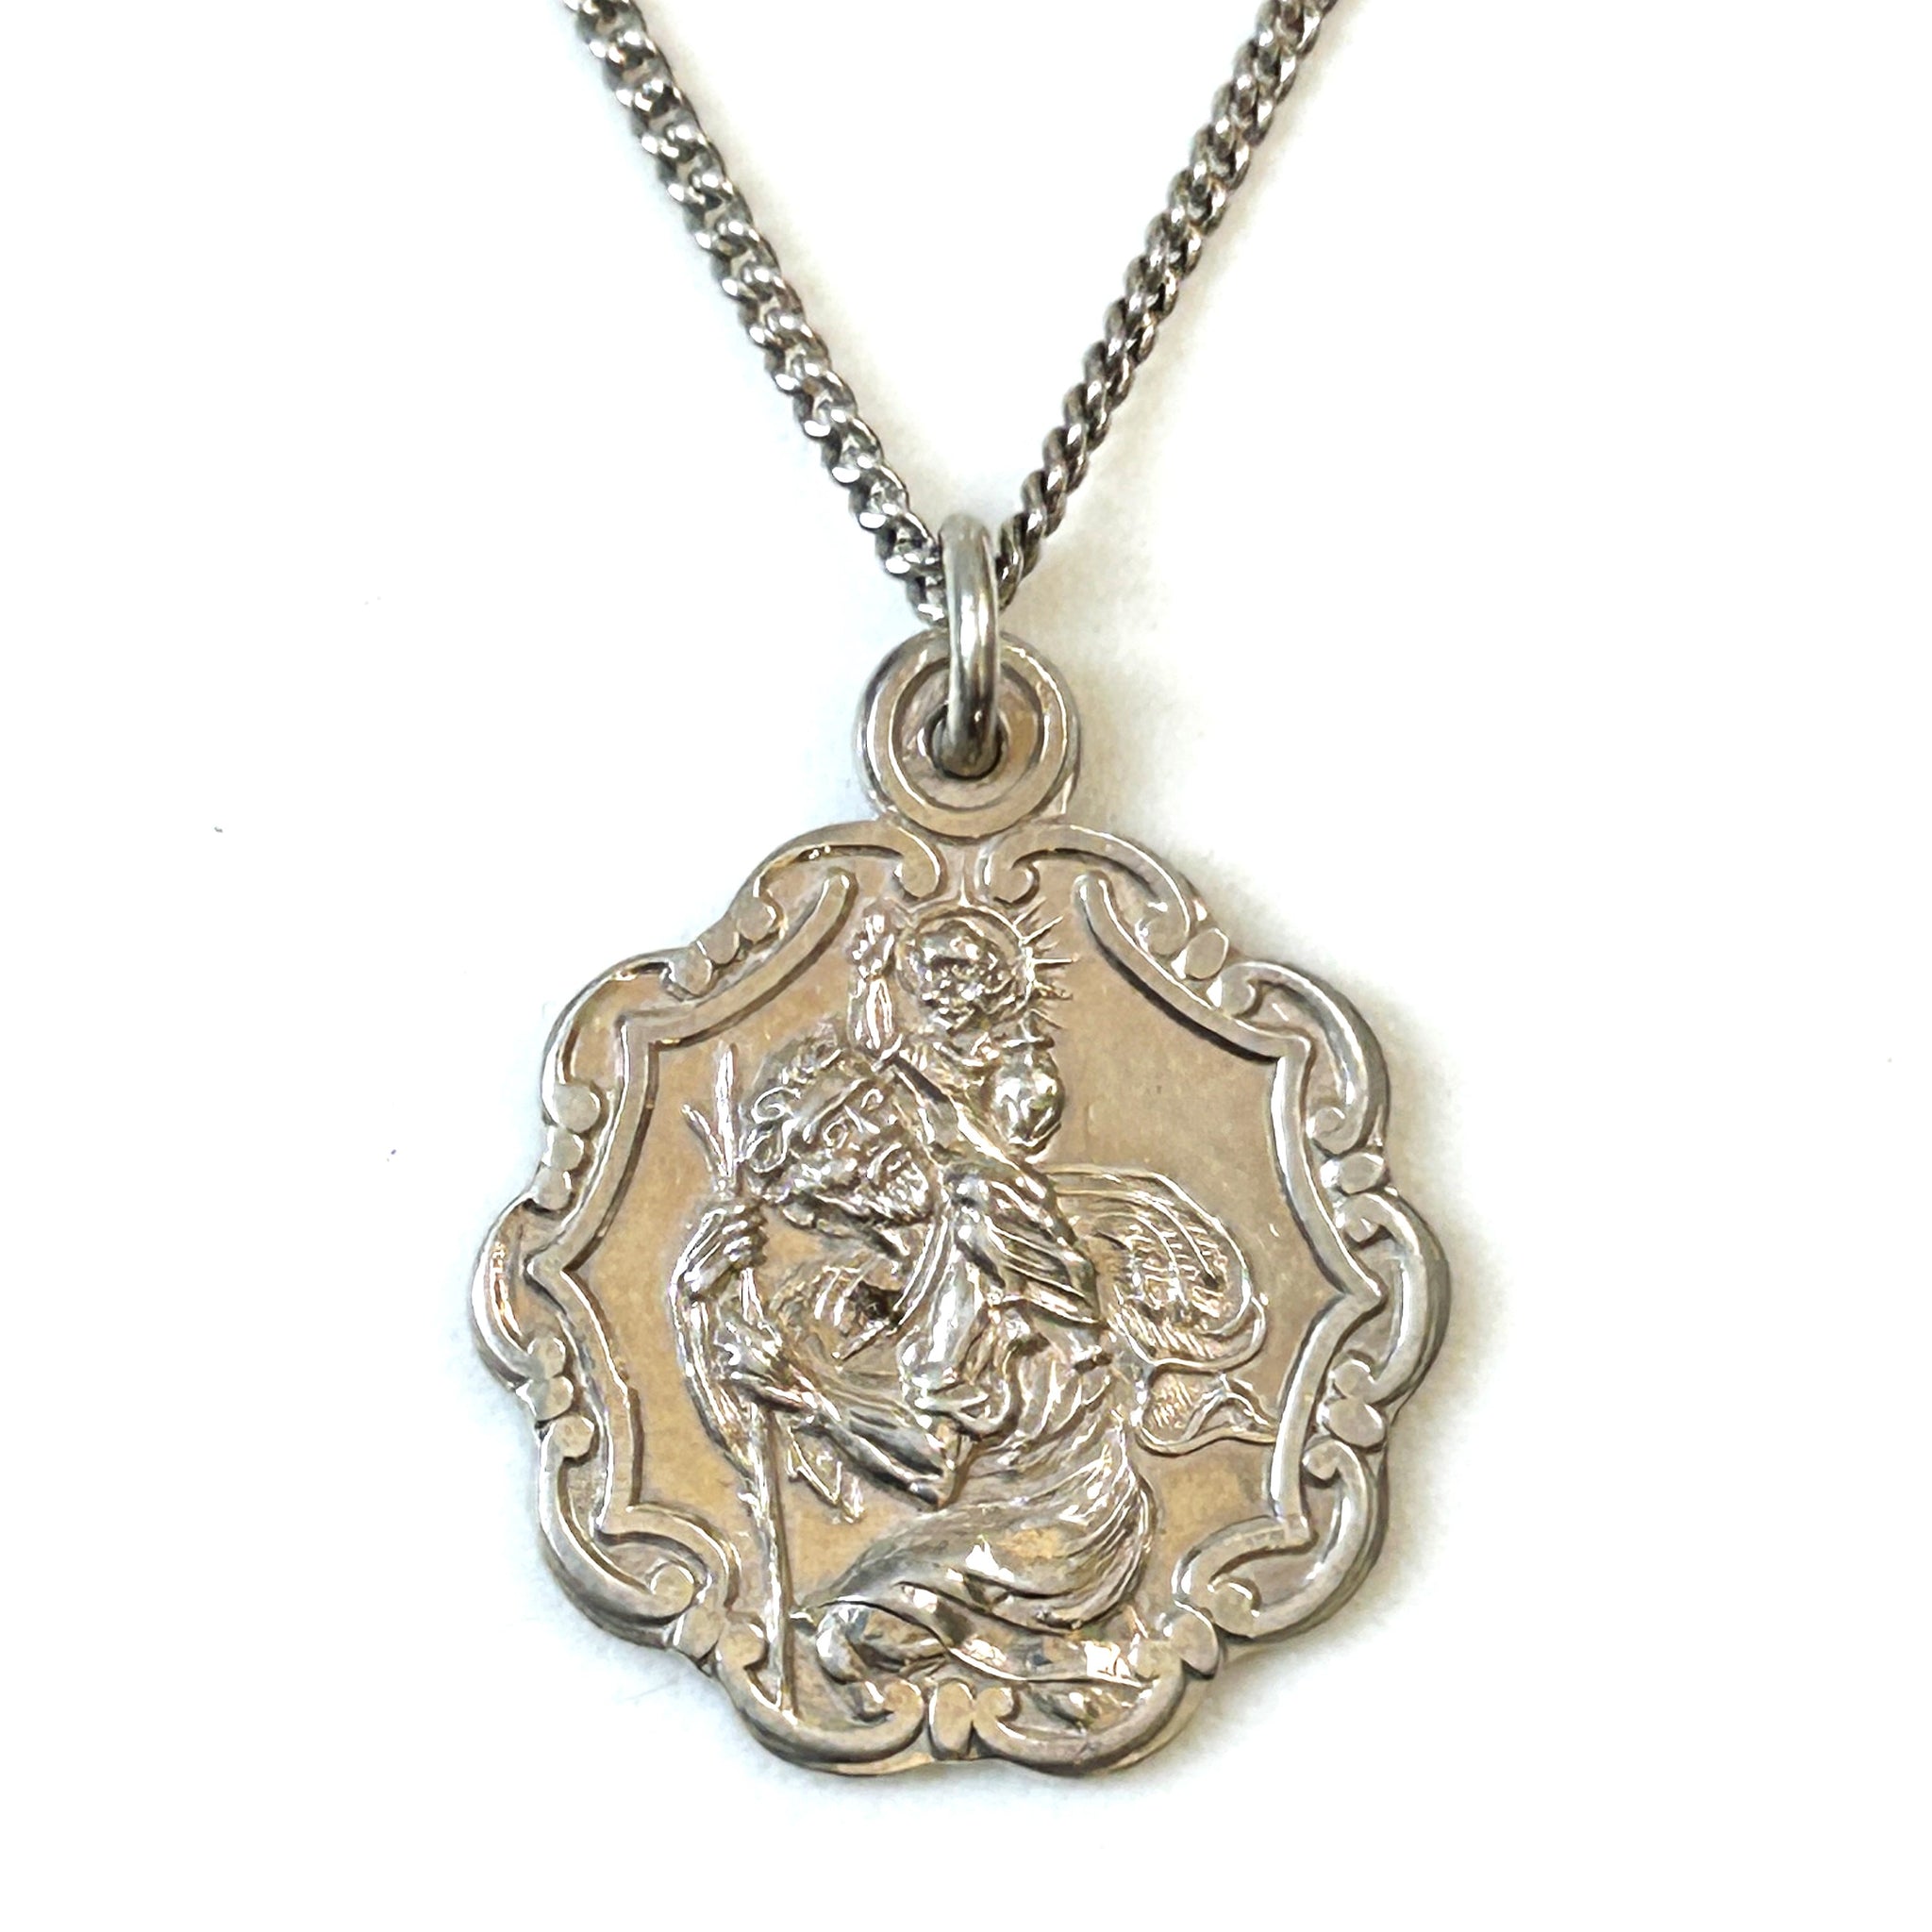 Silver “St Christopher” Pendant on Chain